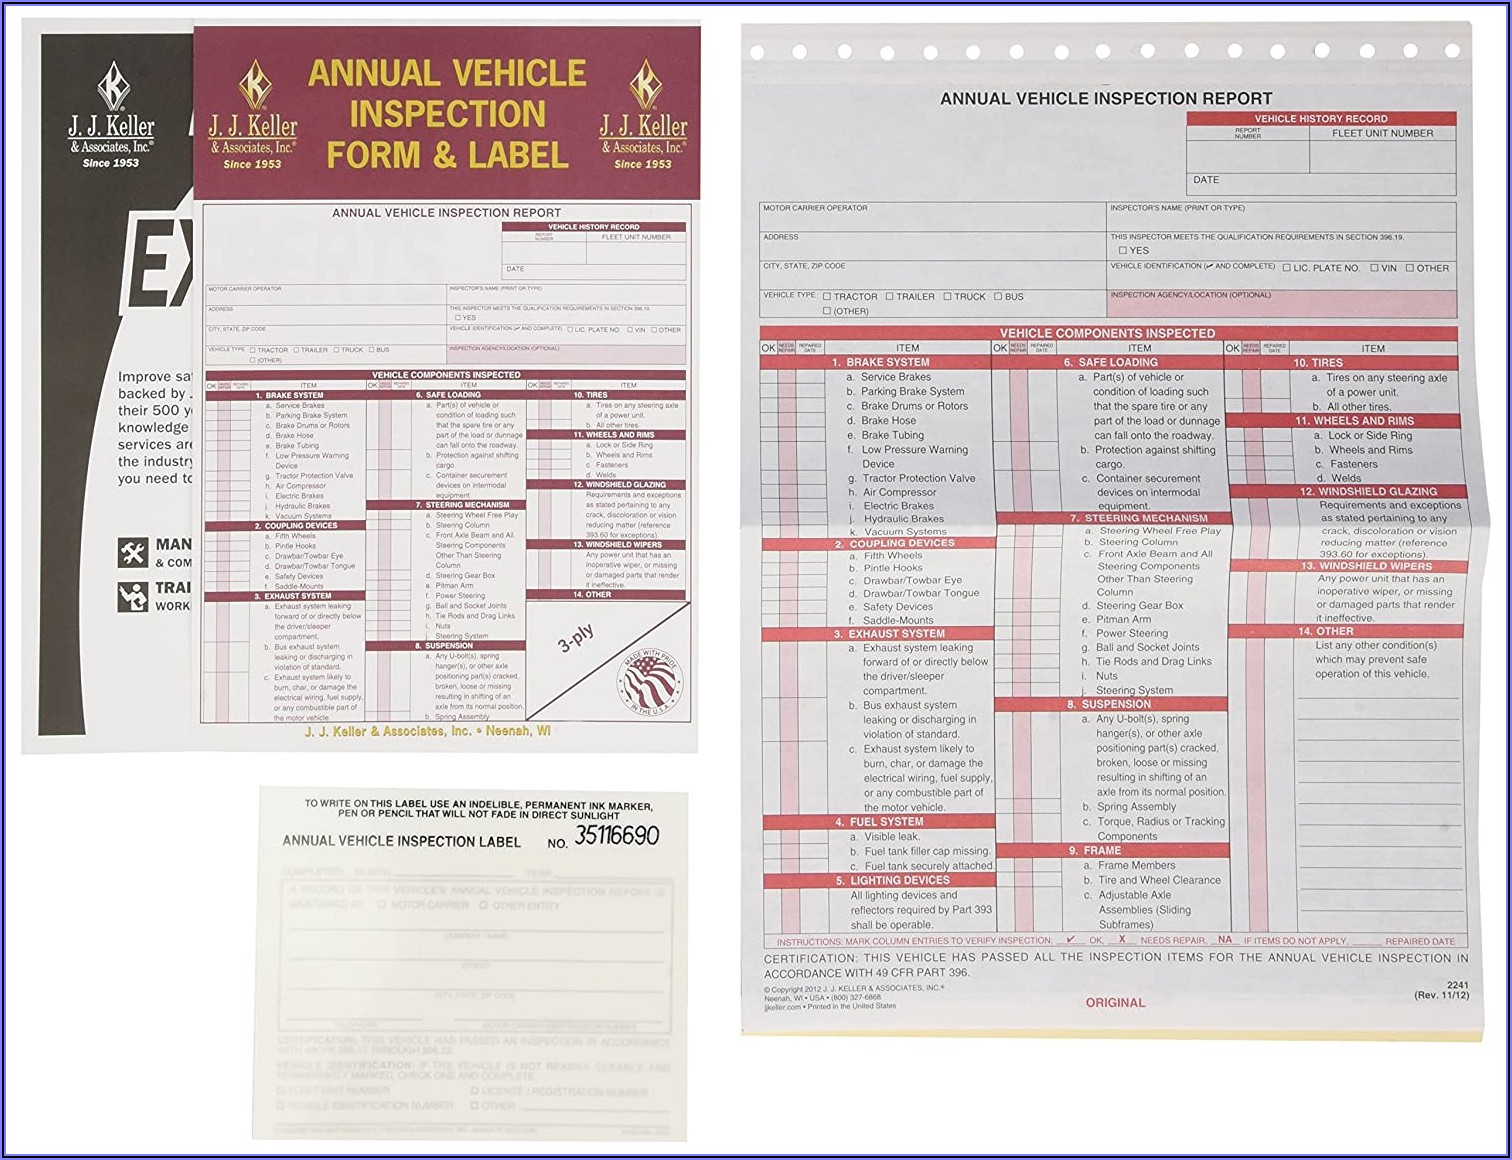 Annual Vehicle Inspection Report Forms